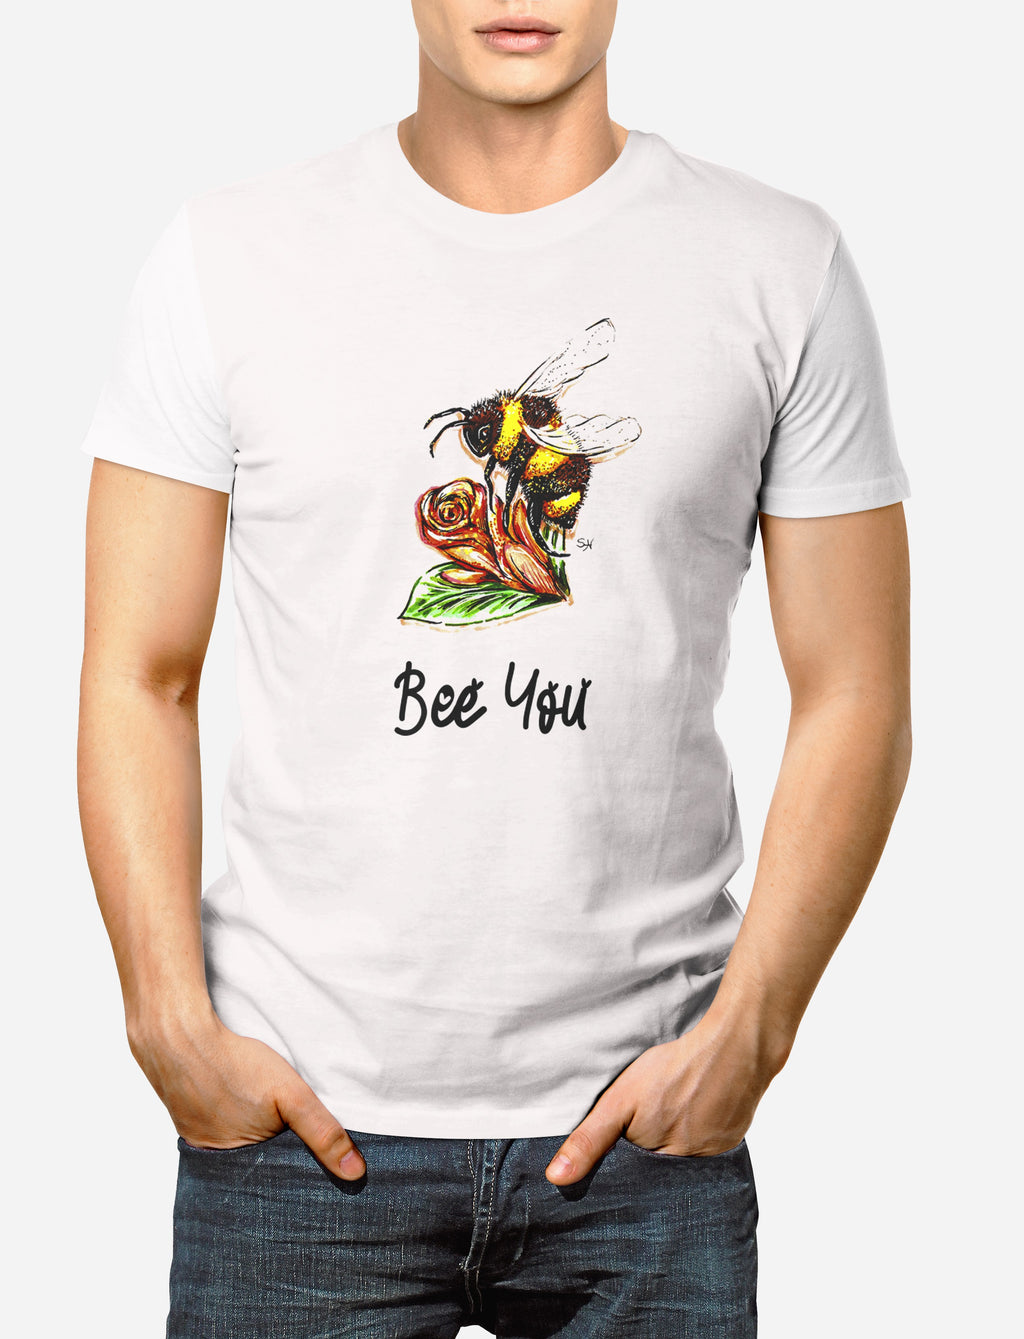 Bee You - Mens T-Shirt - Artwork by the Very Talented Artist Sarah Neville - Made to Order